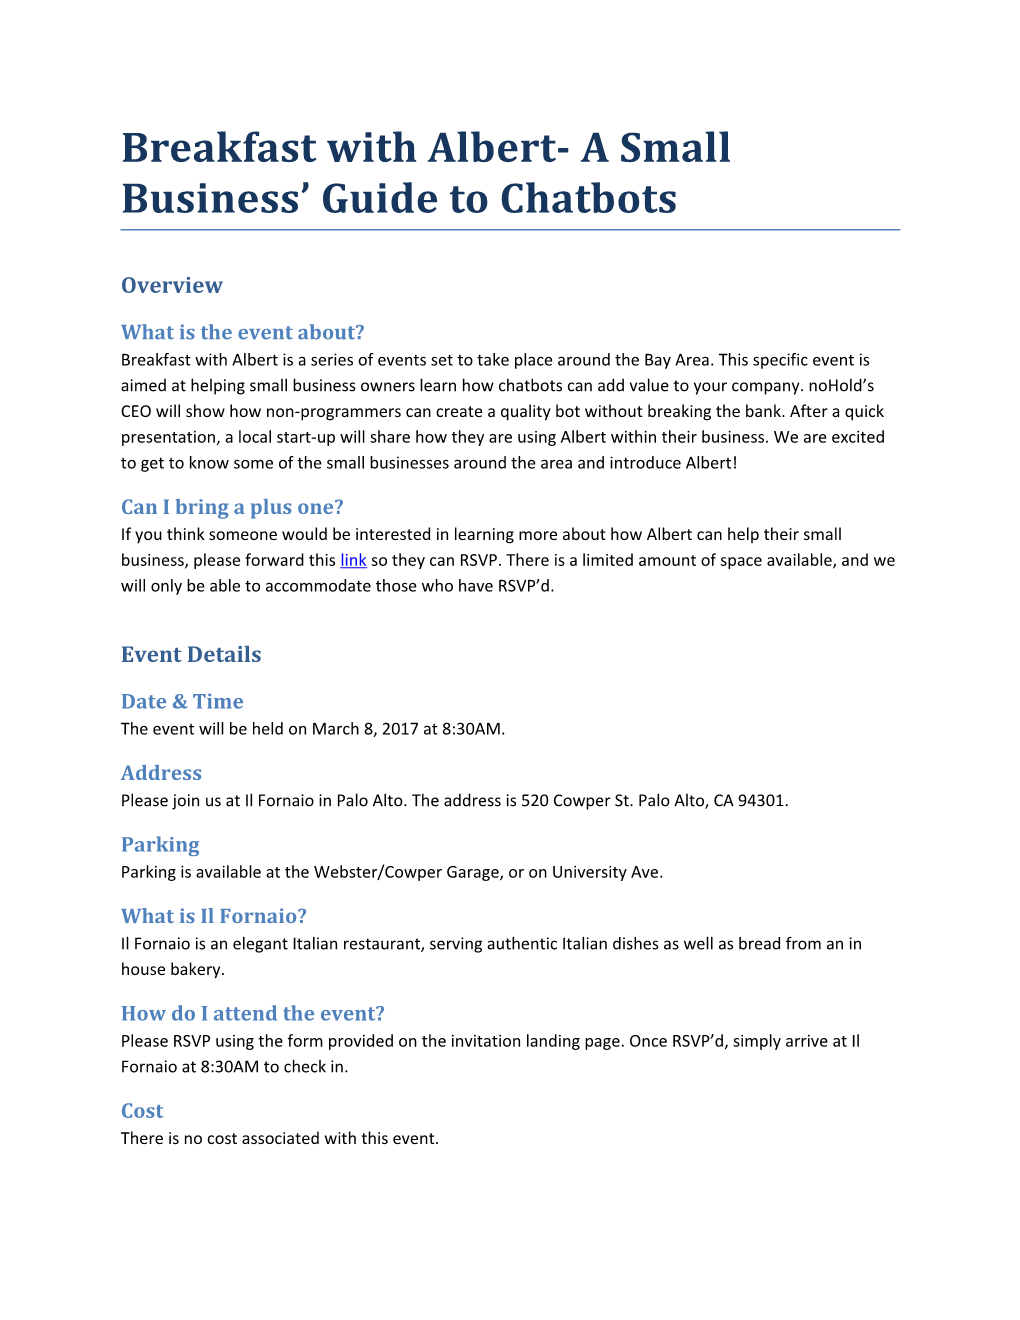 Breakfast with Albert- a Small Business Guide to Chatbots